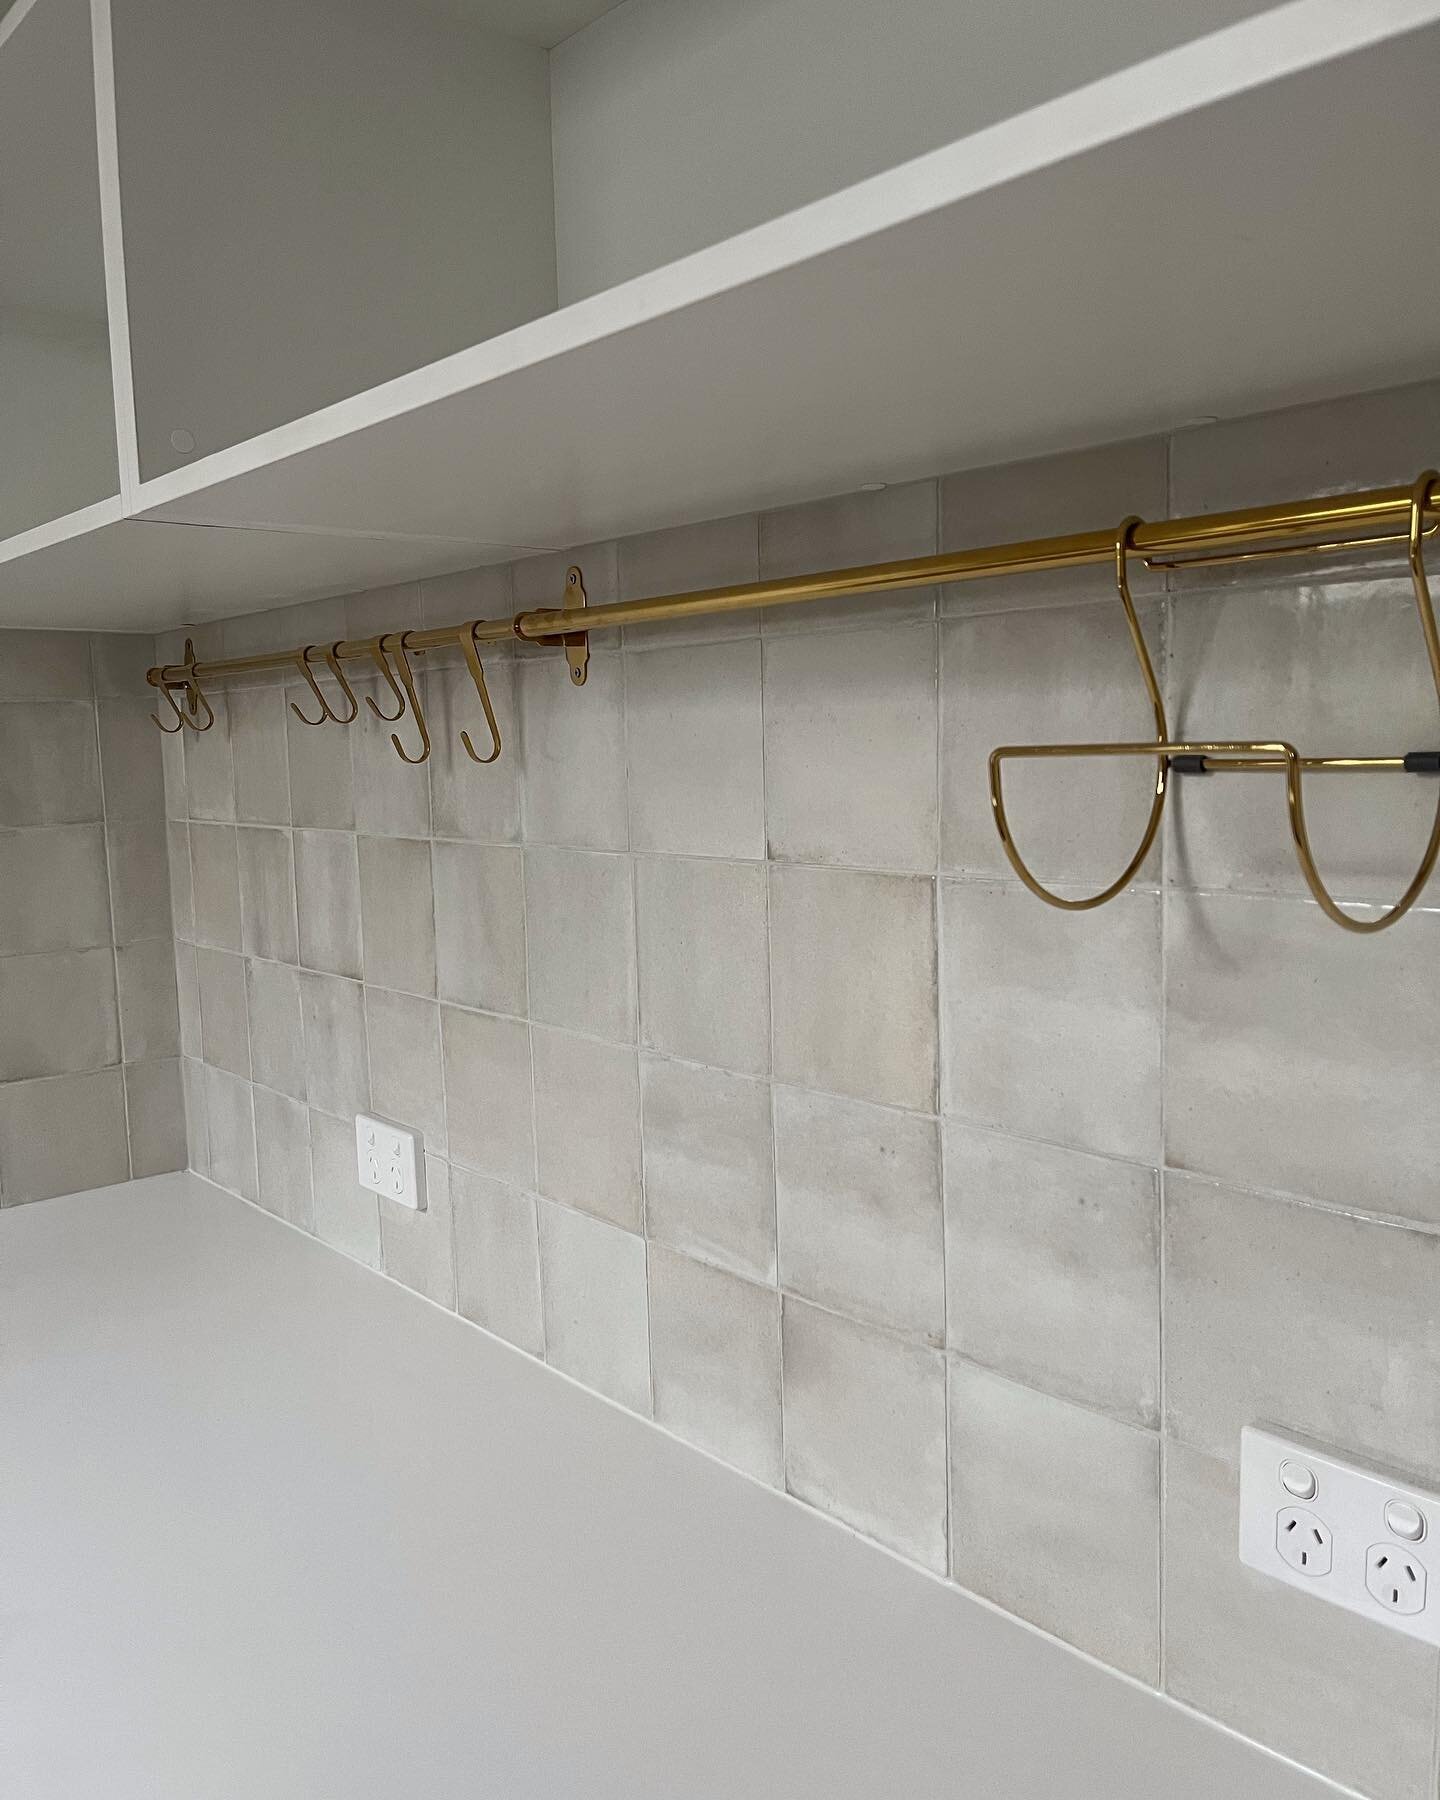 A little brass rail bringing some bling and function to the kitchen.
#interiordesign #kitchendesign #dubbonsw #formandfunction #brass #bultjestreetcottage #countrycottage #interiorstyling